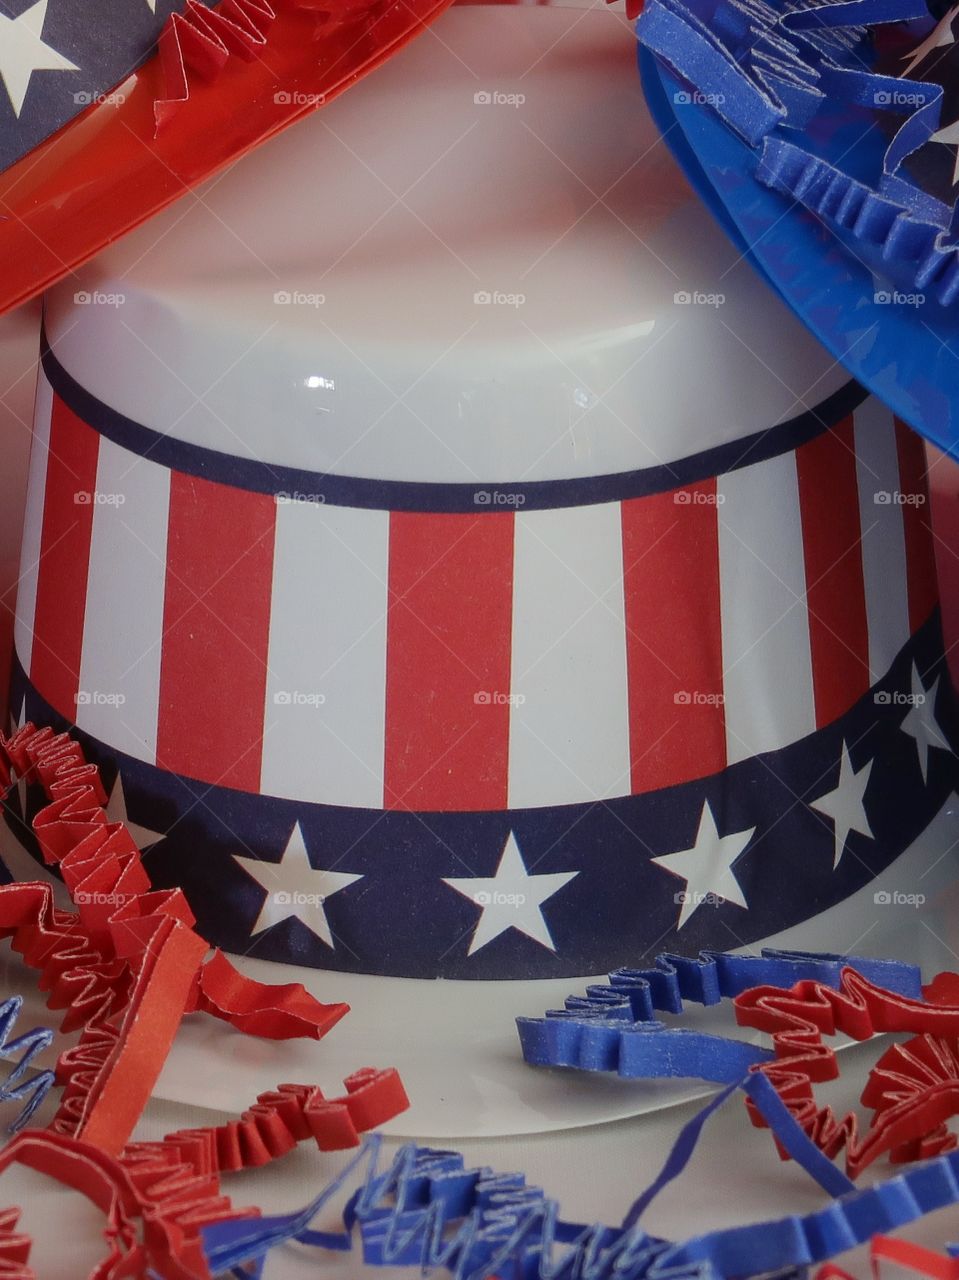 Tiny party hats in red, white, and blue with the Stars and Stripes for hat bands on a table with confetti. 